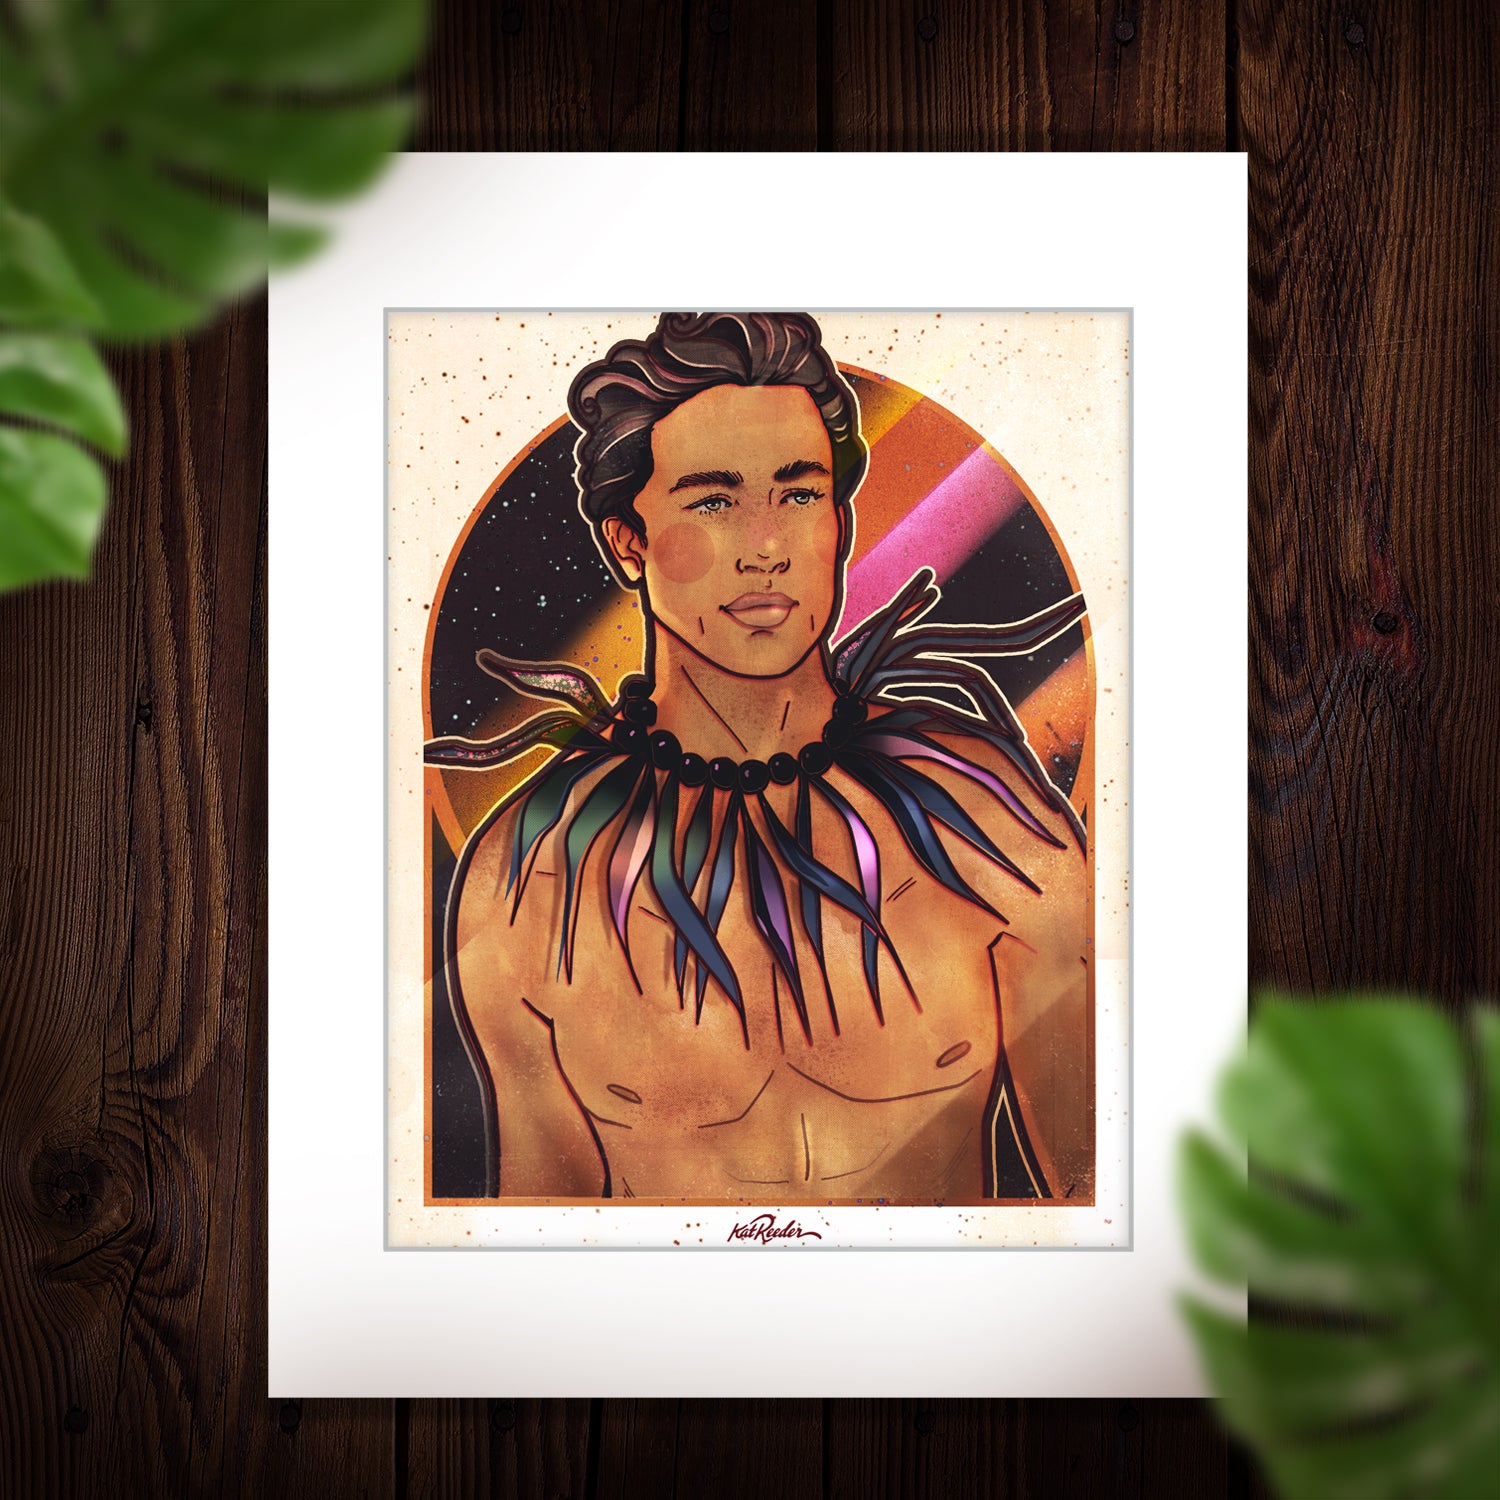 11x14 matted print featuring a retro illustration of a native island man featuring a starry sky and a 70s style rainbow as a backdrop.